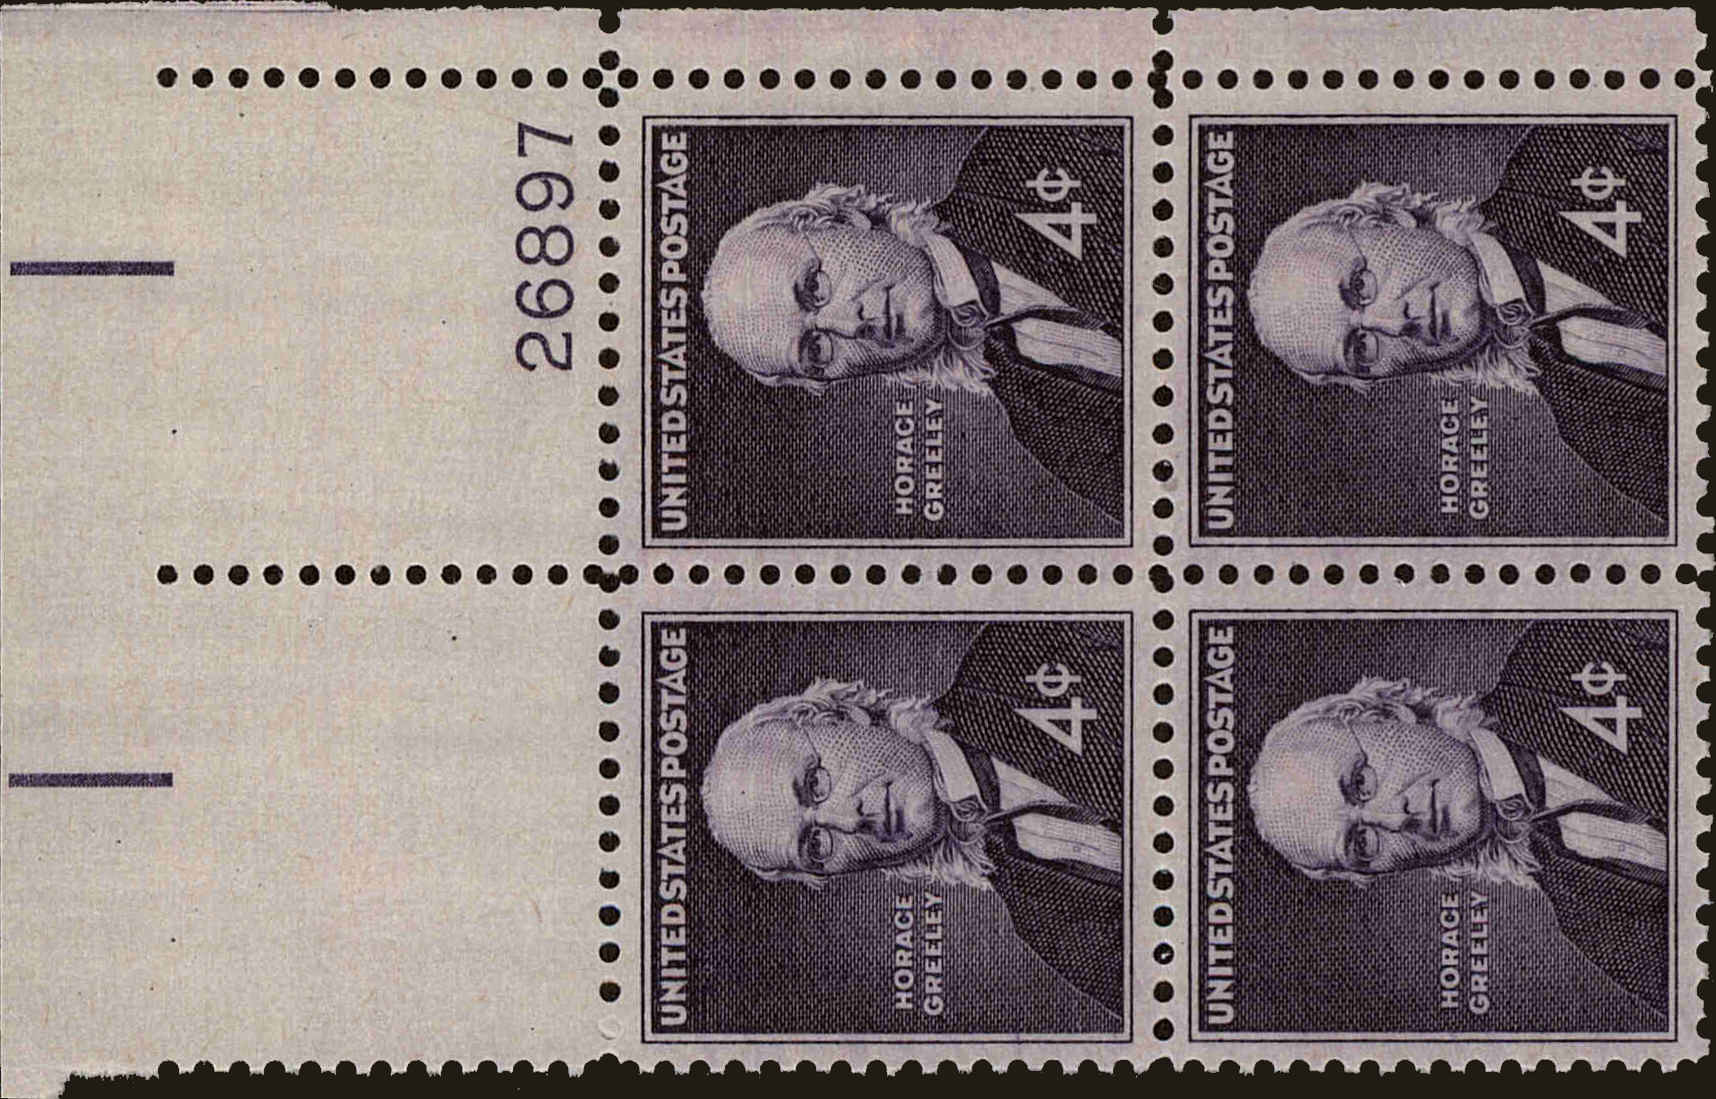 Front view of United States 1177 collectors stamp